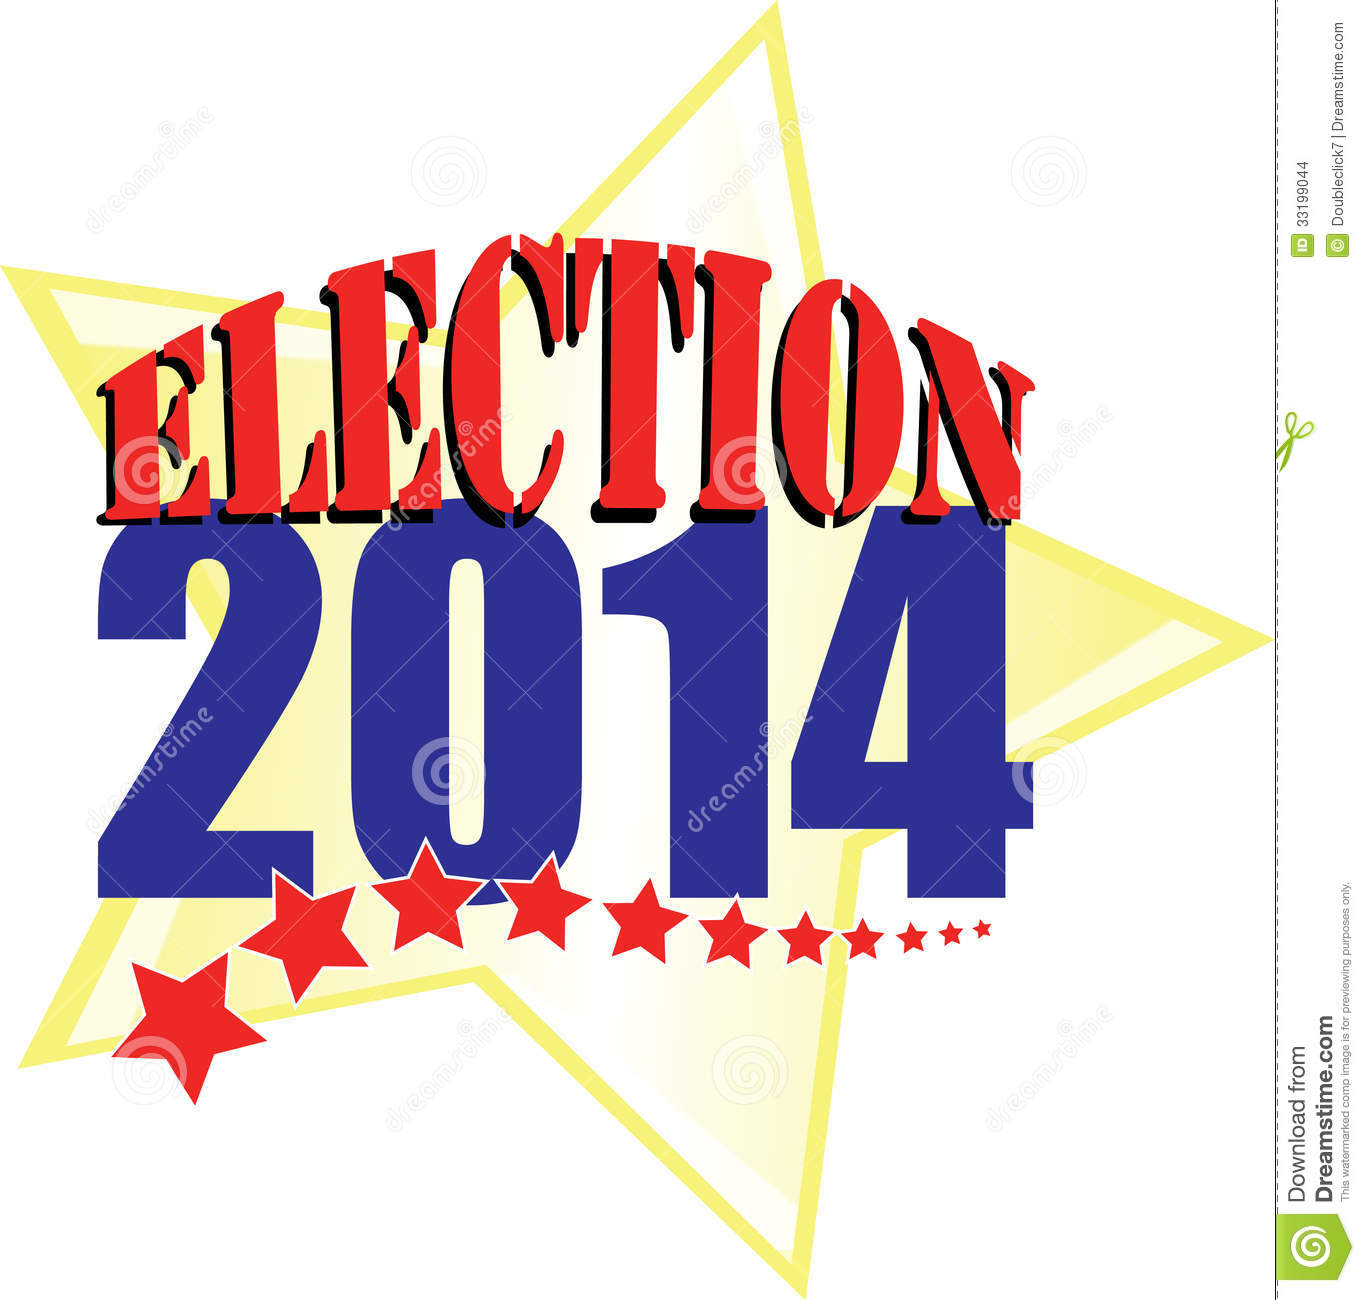 Election 2014 For United States Senate And Congress And Other State